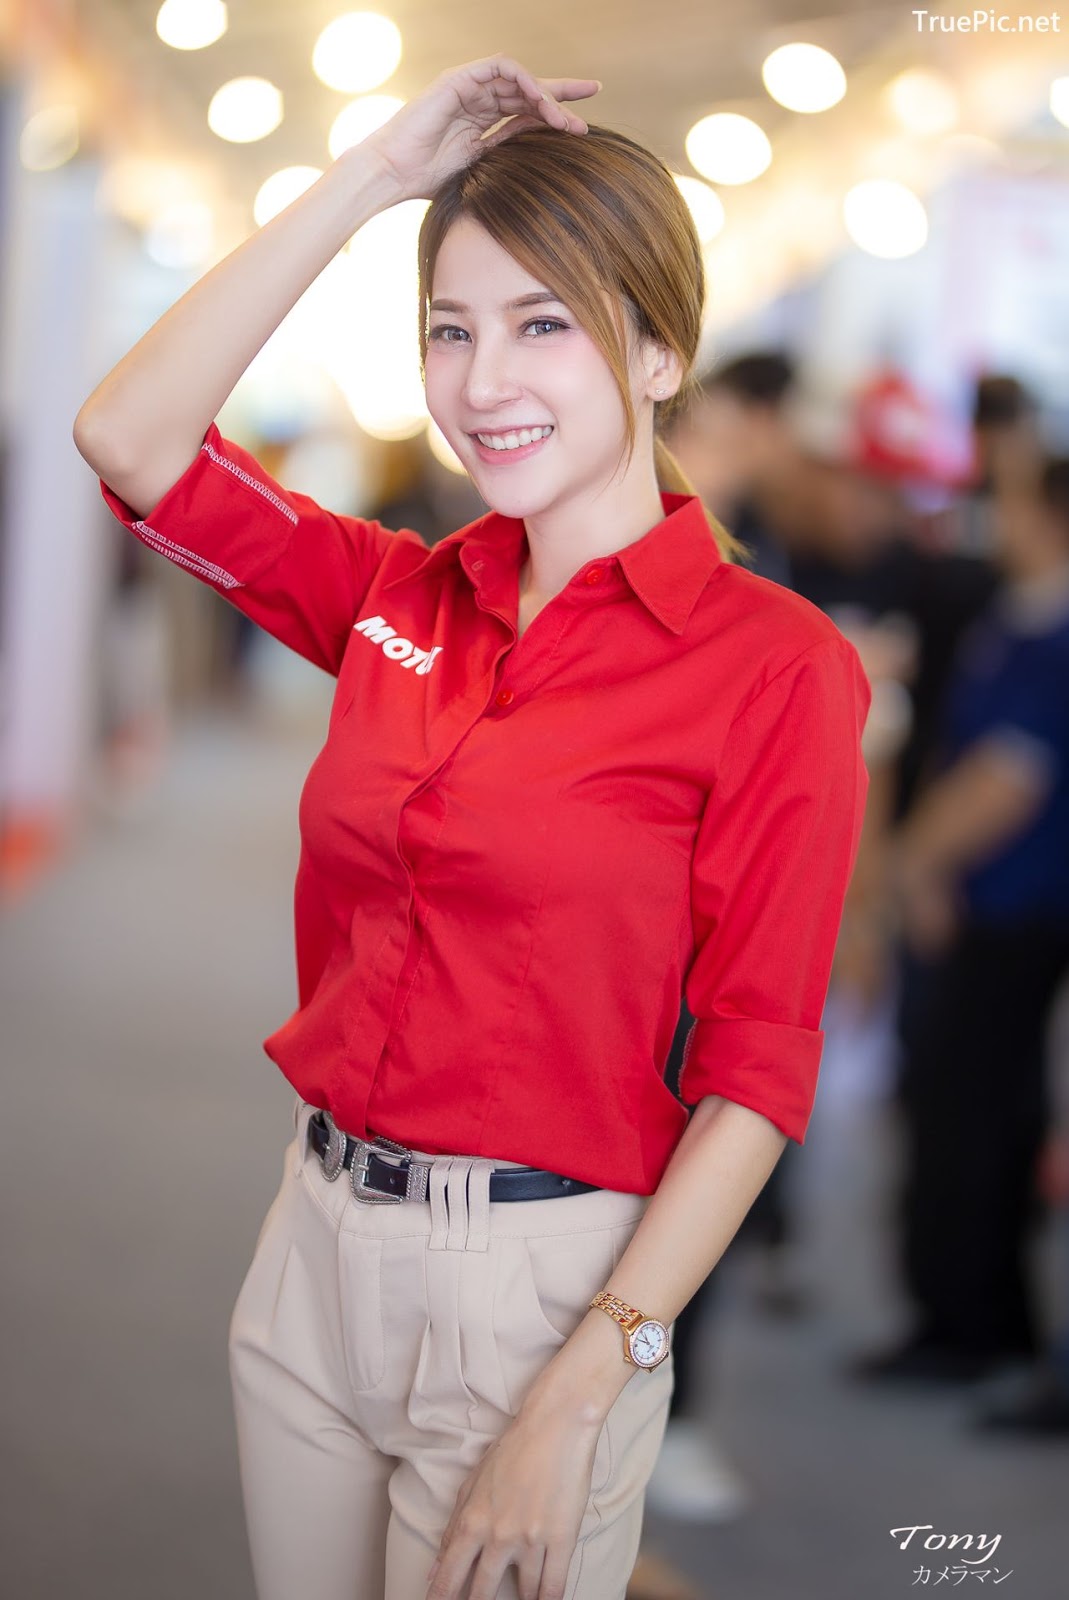 Image-Thailand-Hot-Model-Thai-Racing-Girl-At-Motor-Show-2019-TruePic.net- Picture-64